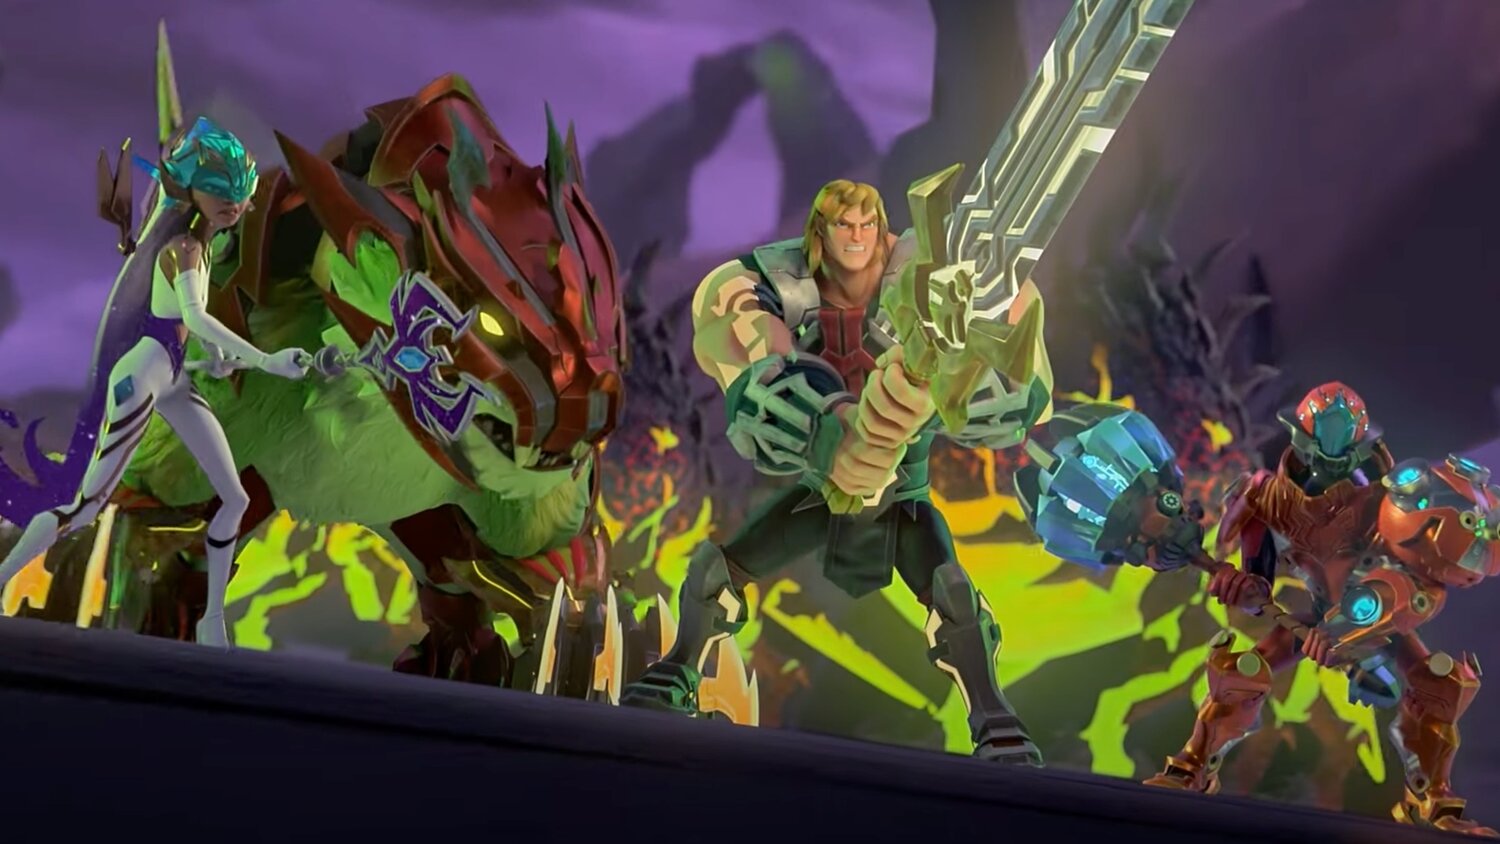 HE-MAN AND THE MASTERS OF THE UNIVERSE Series Trailer